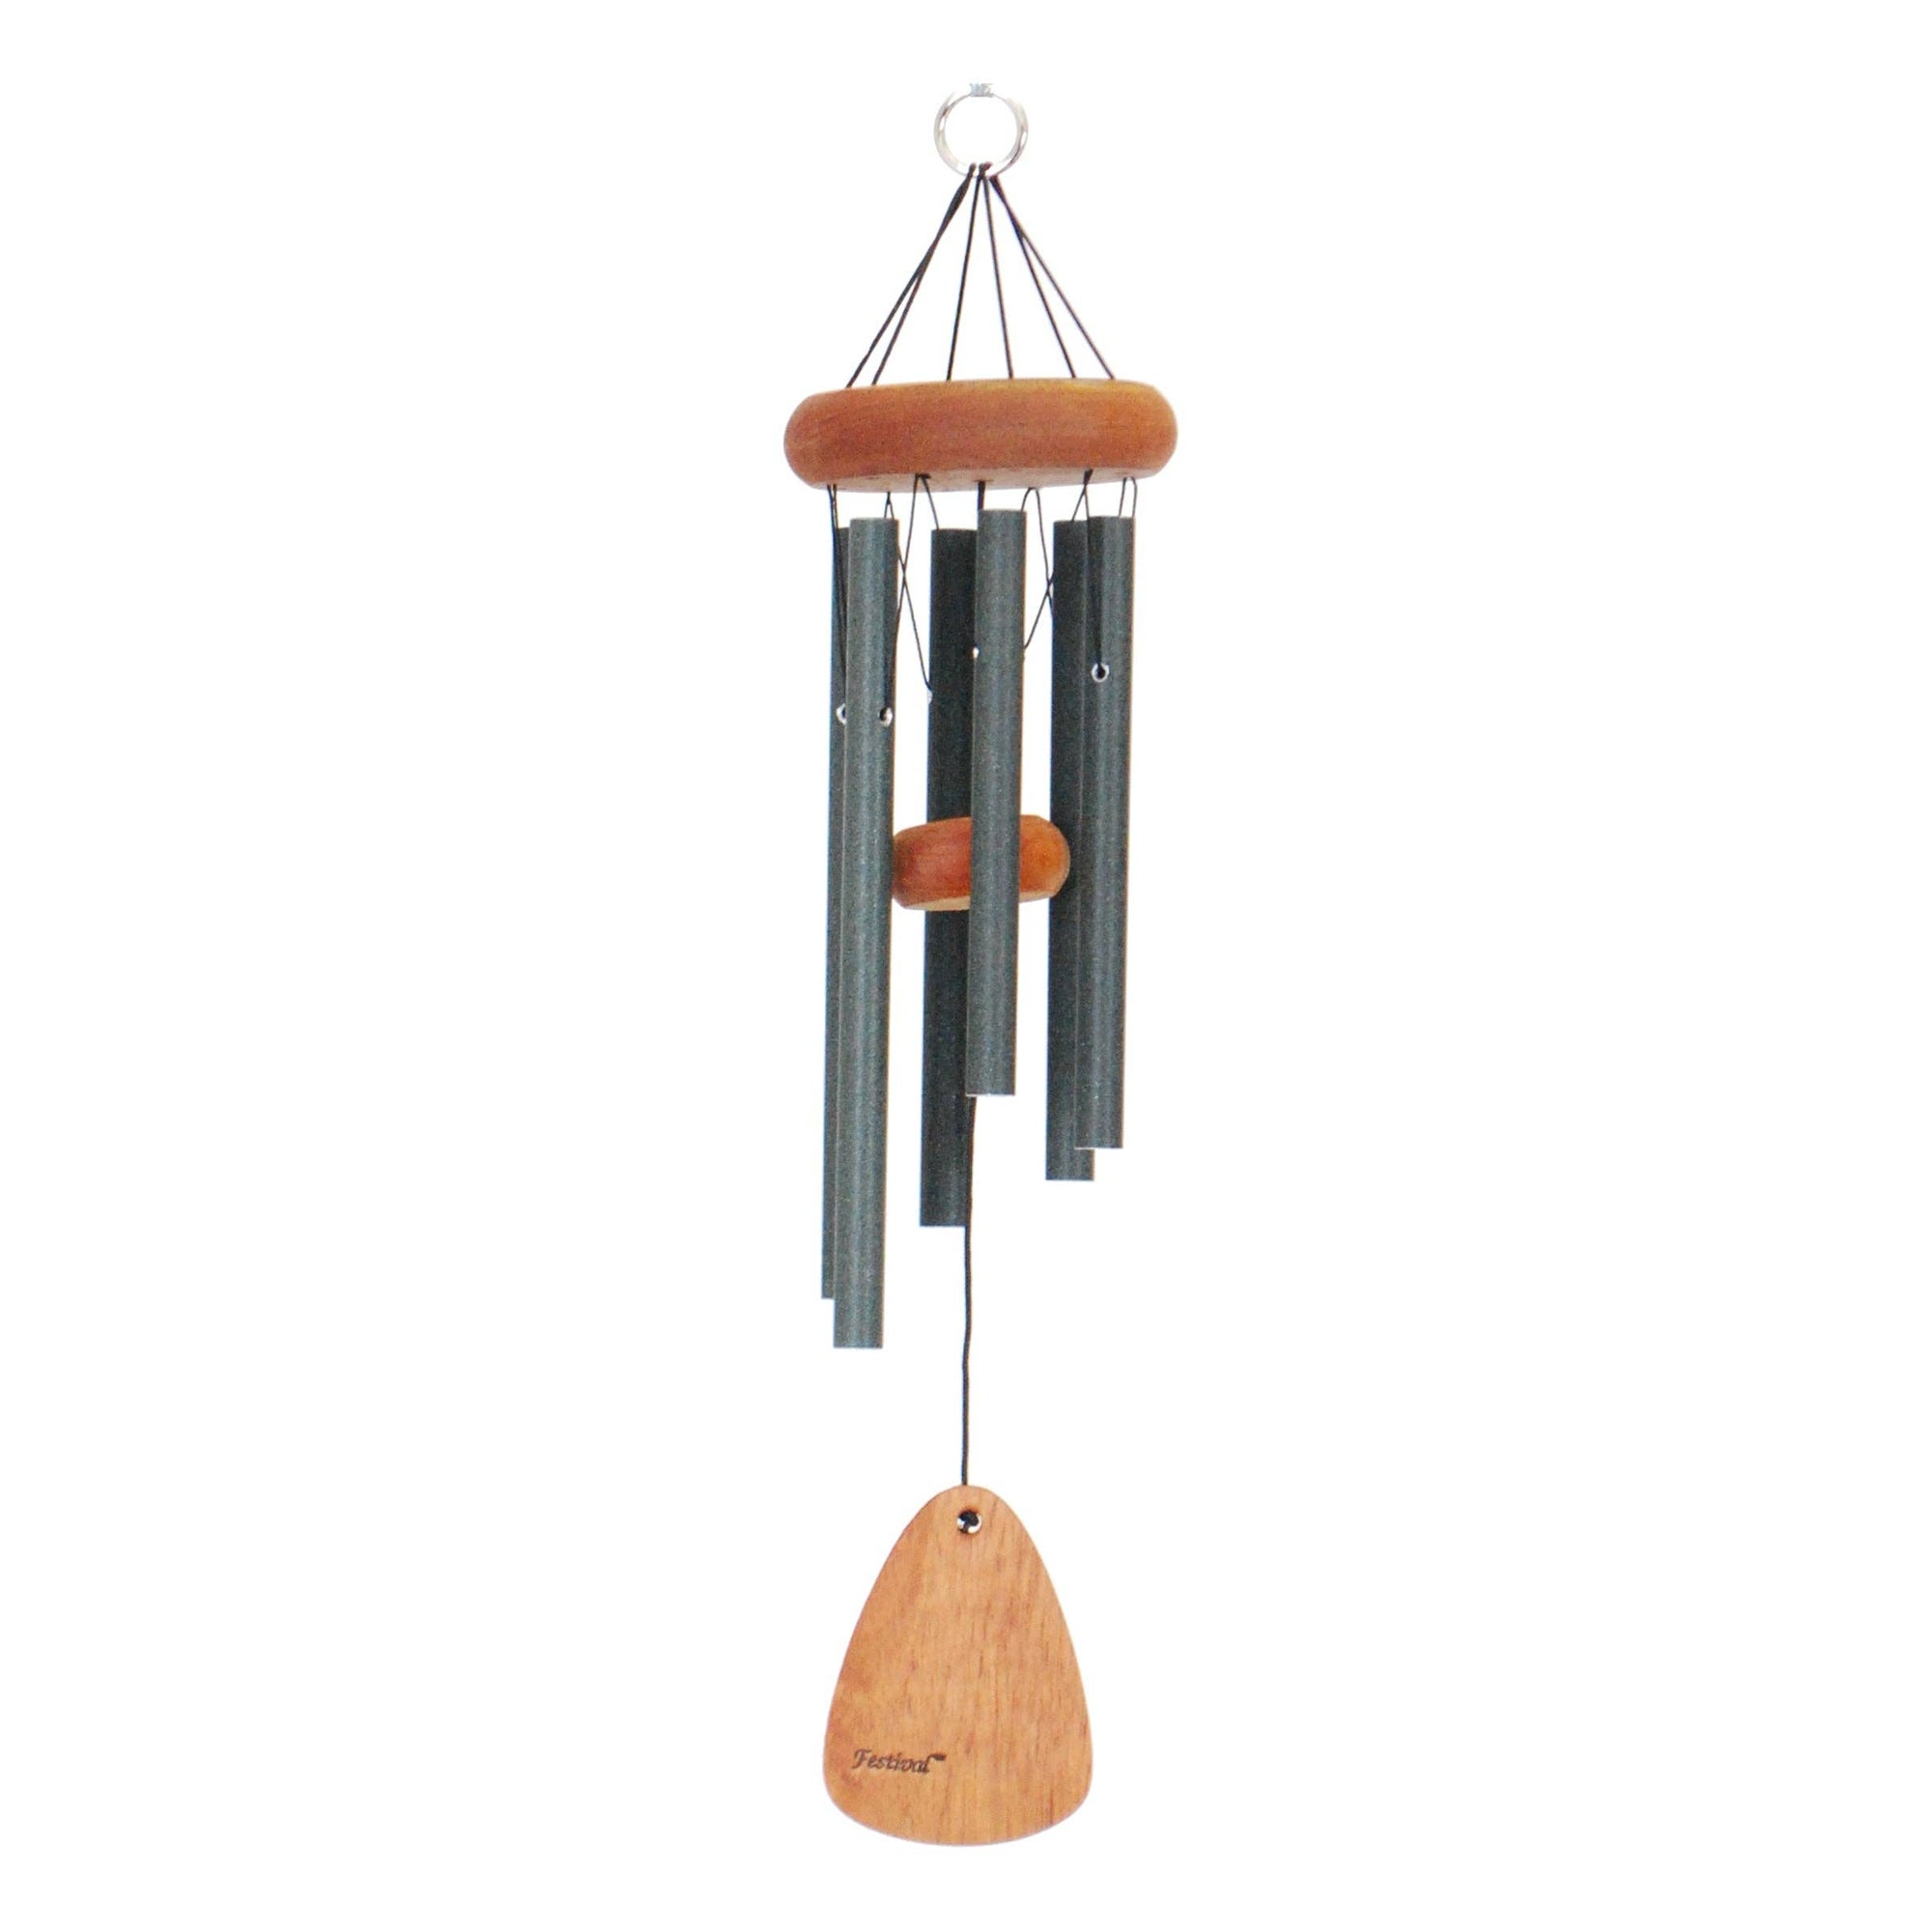 A Festival® 18-inch Windchime, an accent piece, hanging on a white background.